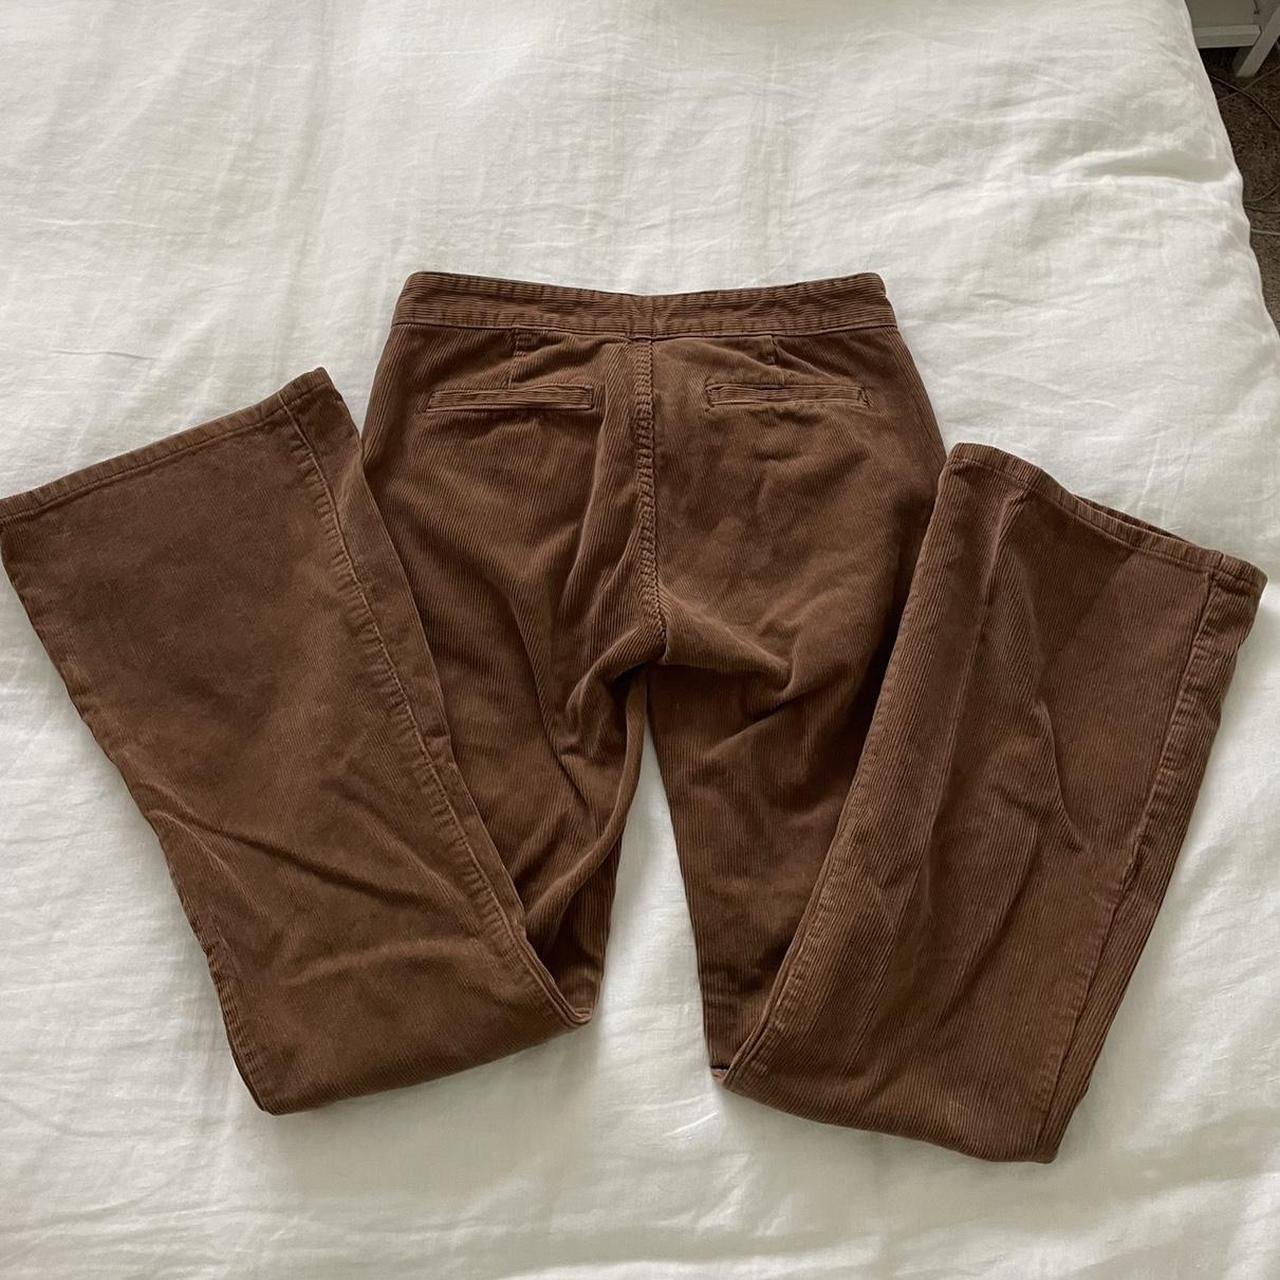 Brandy Melville Brown Corduroy Flare Pants Size 24 - $22 - From J